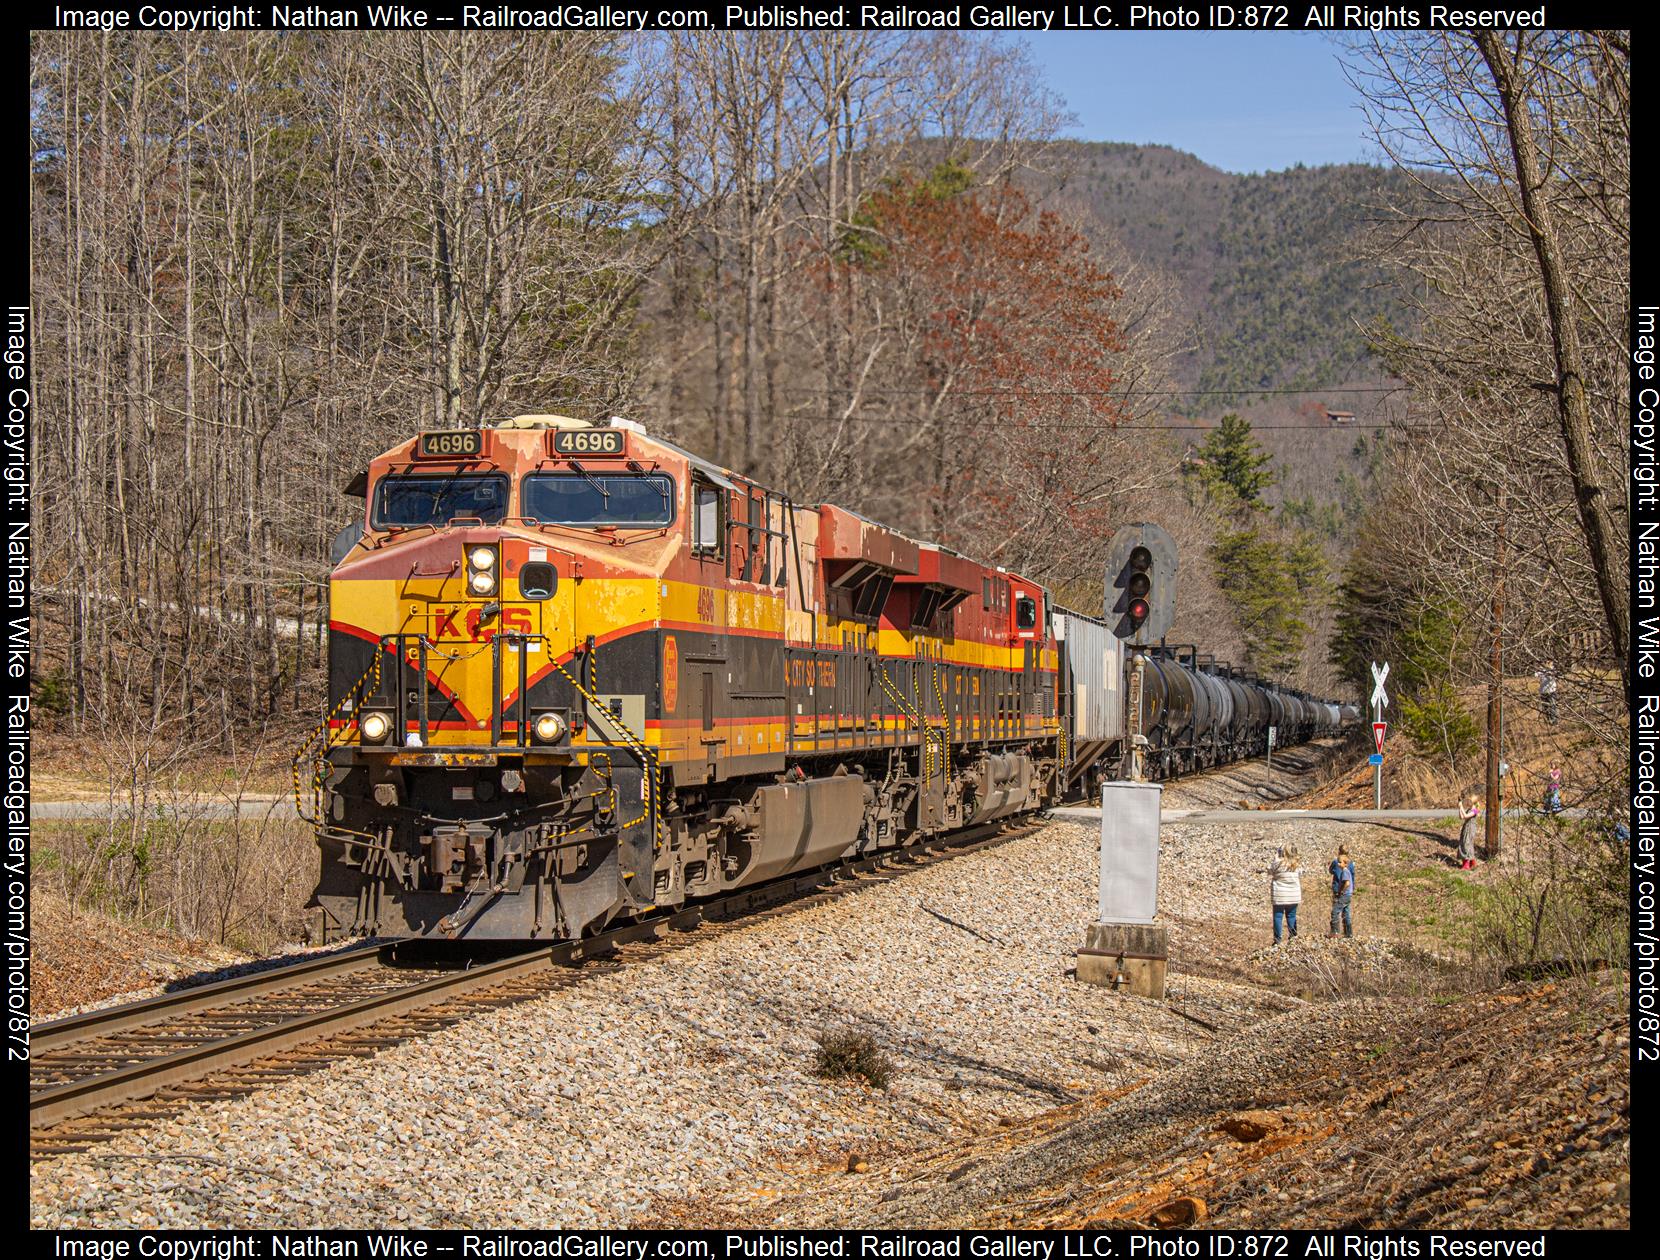 KCS 4696 is a class ES44AC and  is pictured in Ashford, North Carolina, United States.  This was taken along the Blue Ridge Subdivision  on the CSX Transportation. Photo Copyright: Nathan Wike uploaded to Railroad Gallery on 03/23/2023. This photograph of KCS 4696 was taken on Saturday, March 11, 2023. All Rights Reserved. 